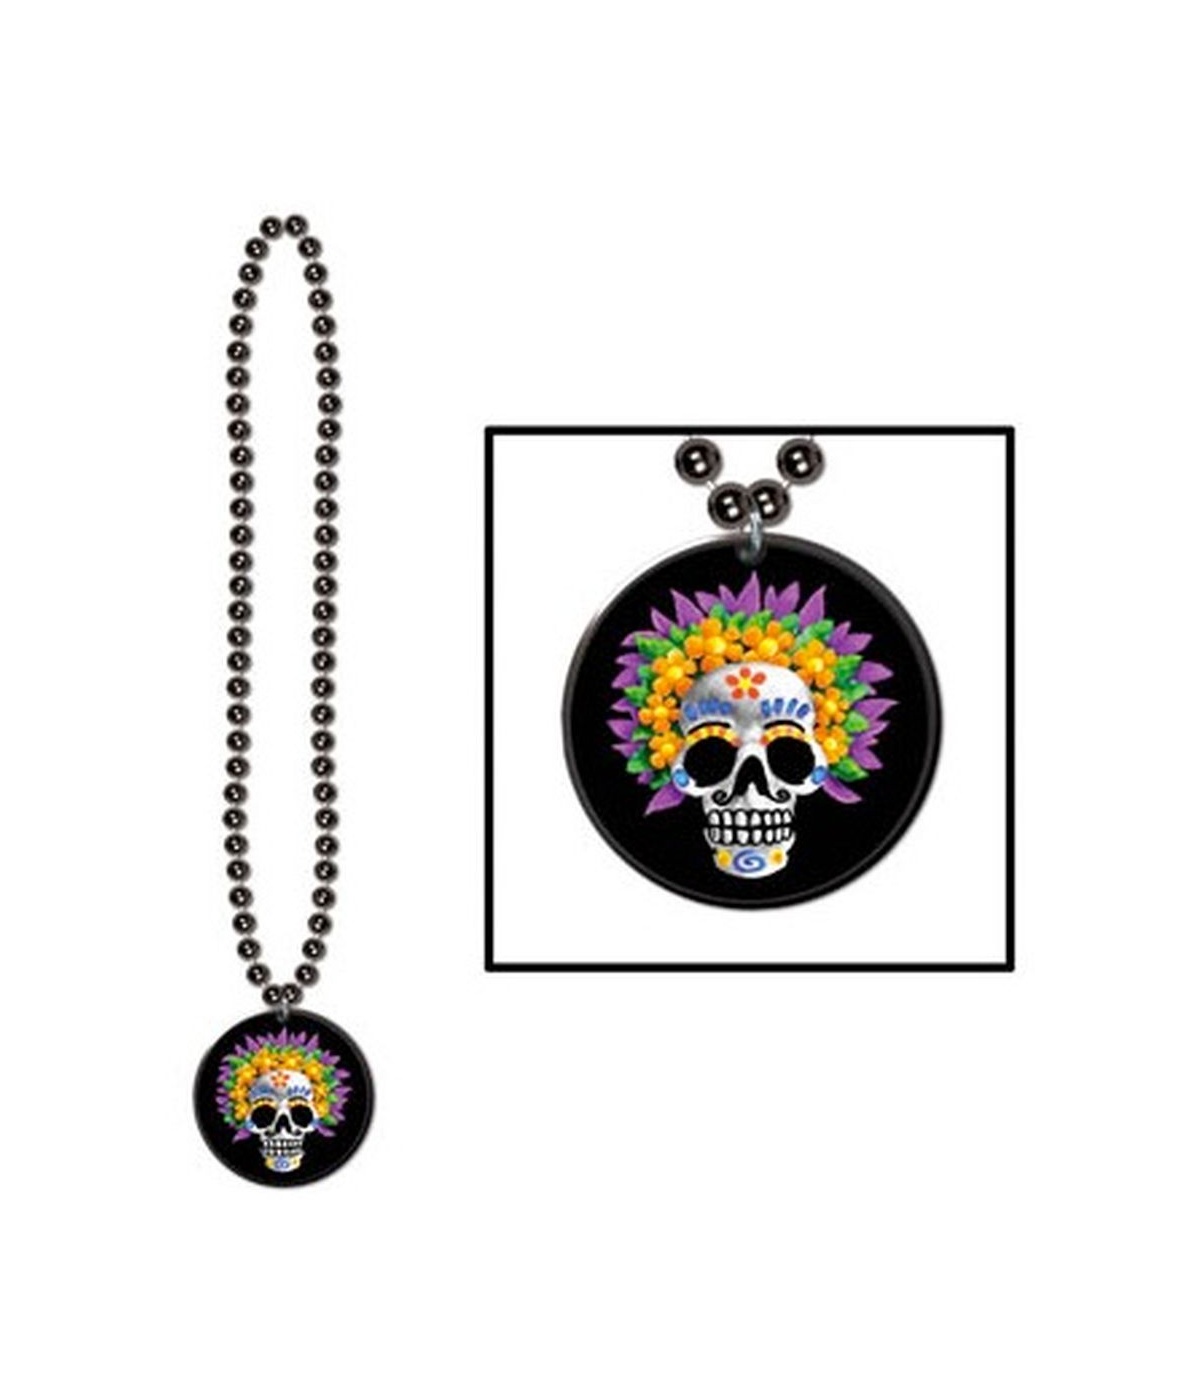  Day of the Dead Beads Medallion